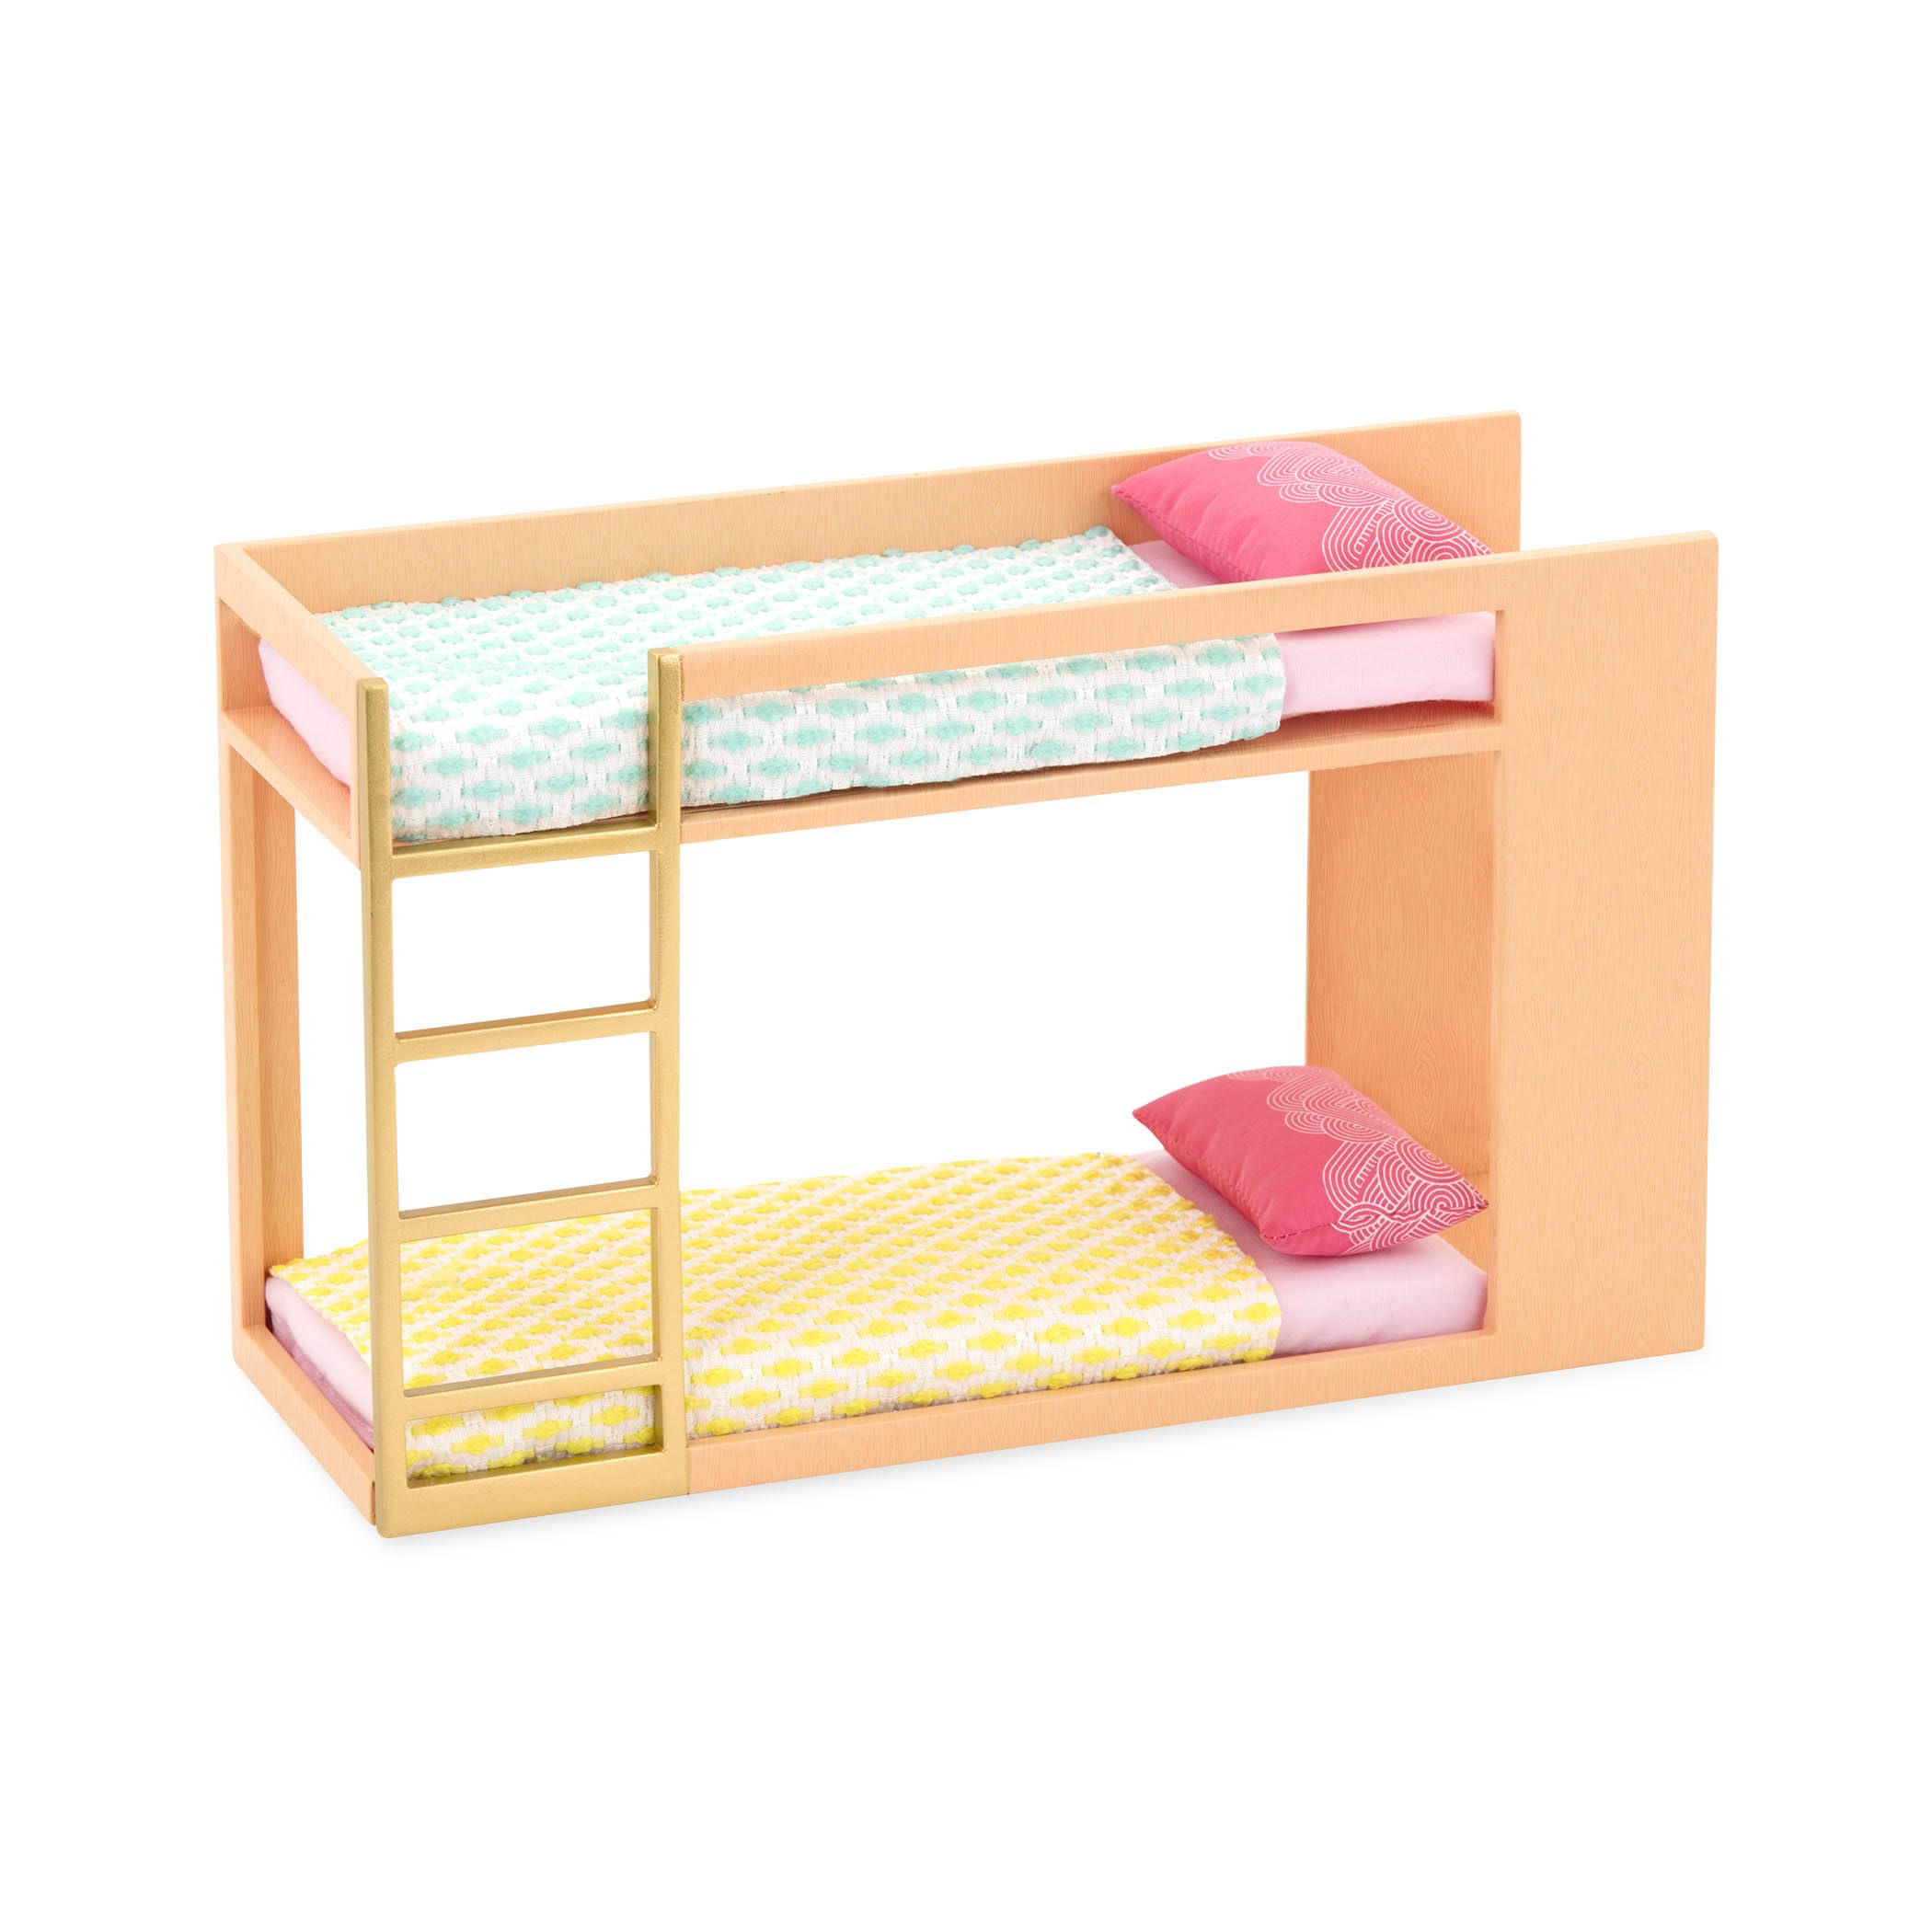 Lori – Bunk Bed Set for Mini Dolls – Bedroom Furniture for 6-Inch Dolls – Dollhouse Accessories – Toys for Kids – 3 Years + – Urban Chic Bunk Bed